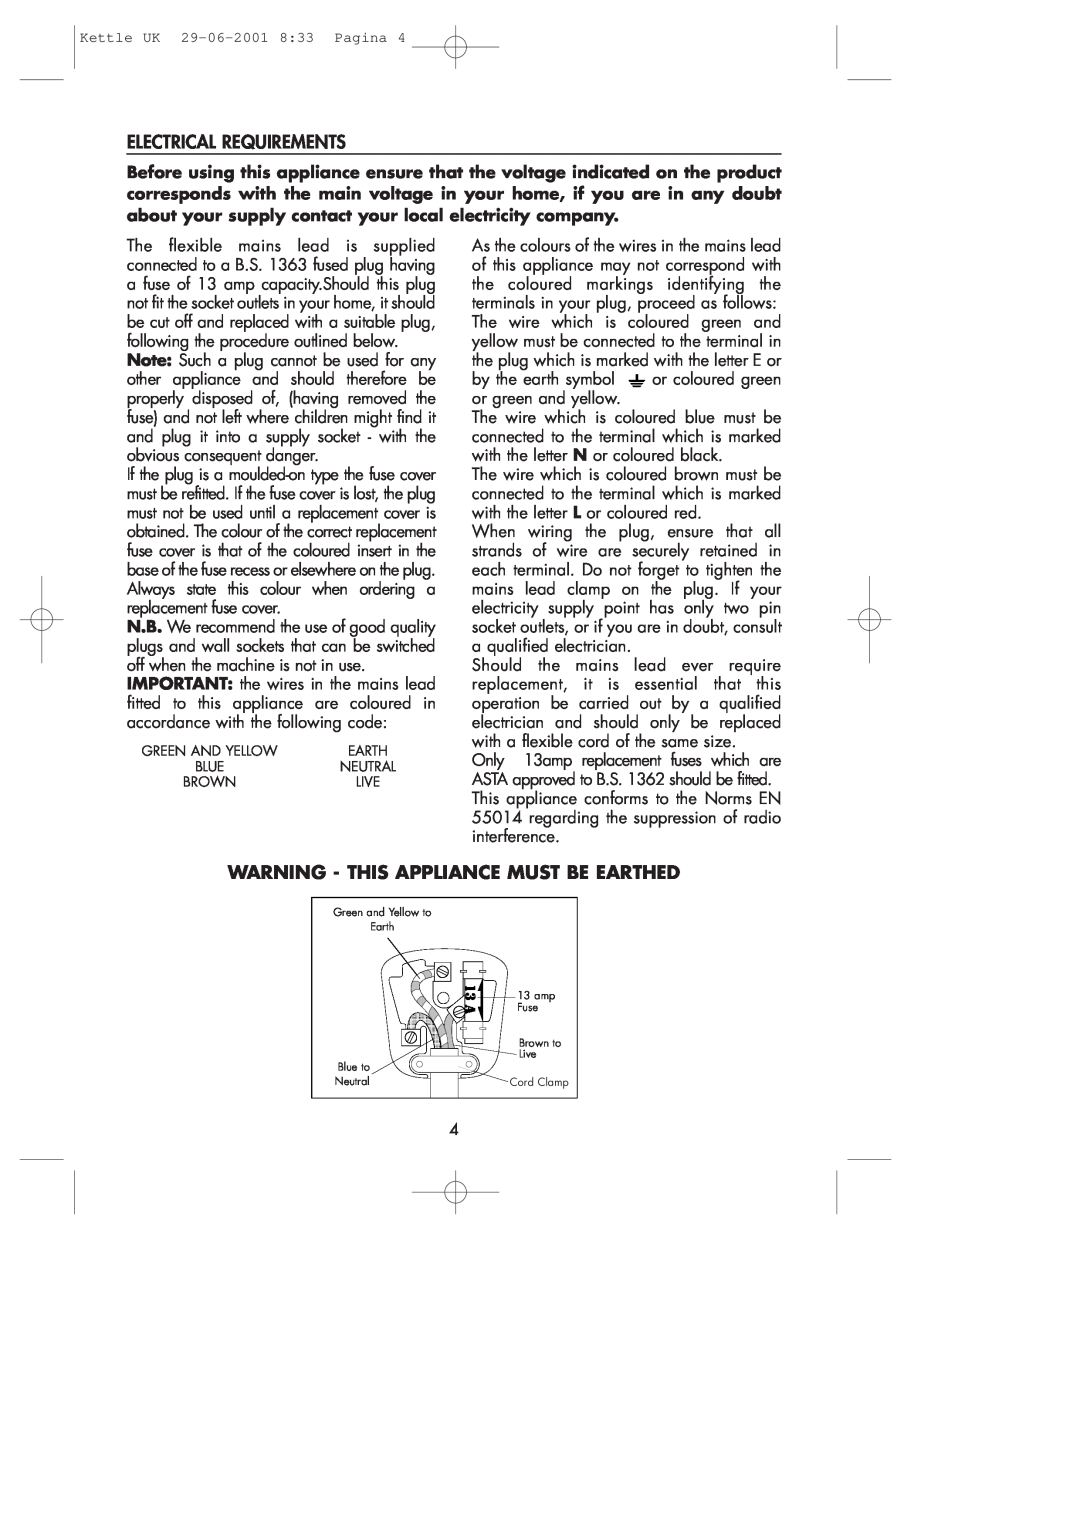 DeLonghi Kettle manual Electrical Requirements, Warning - This Appliance Must Be Earthed 